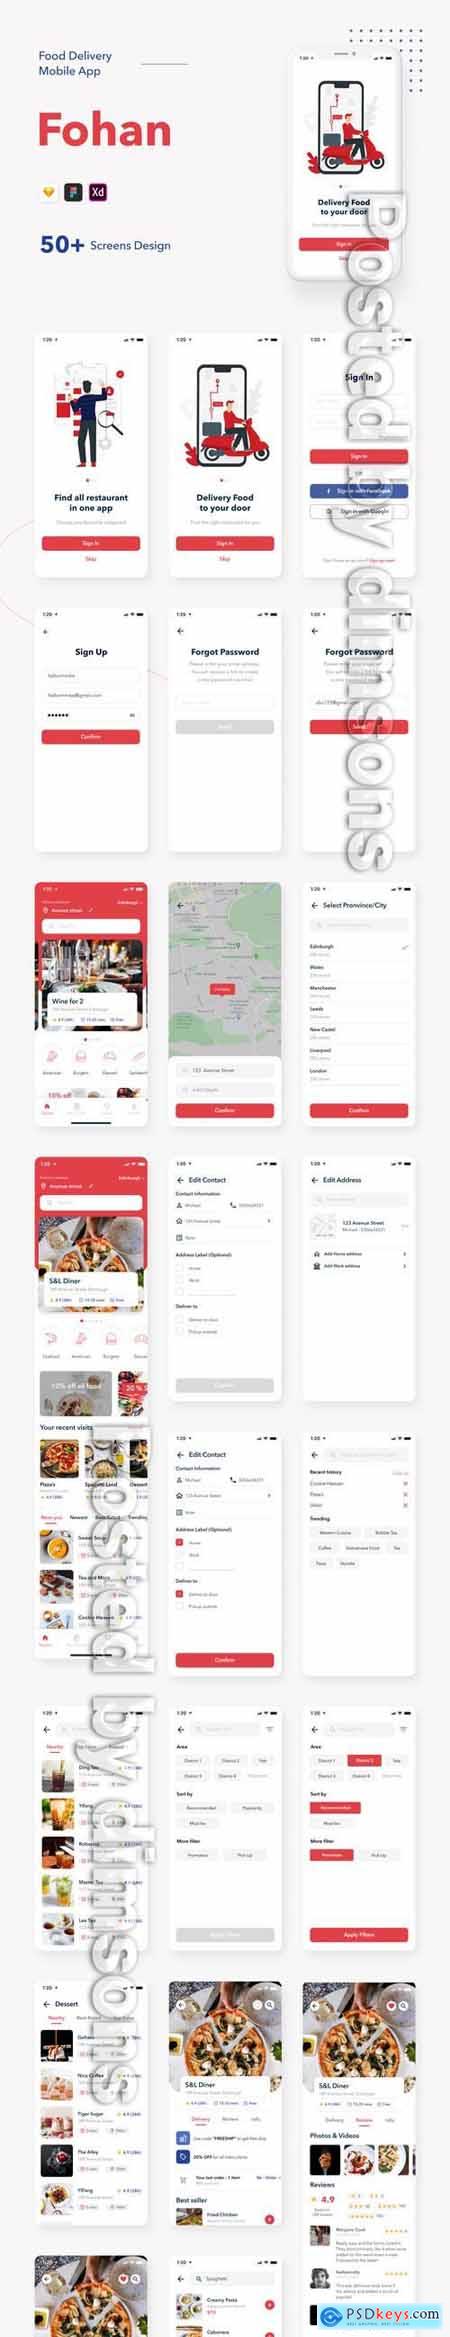 Fohan - Food Delivery Mobile App